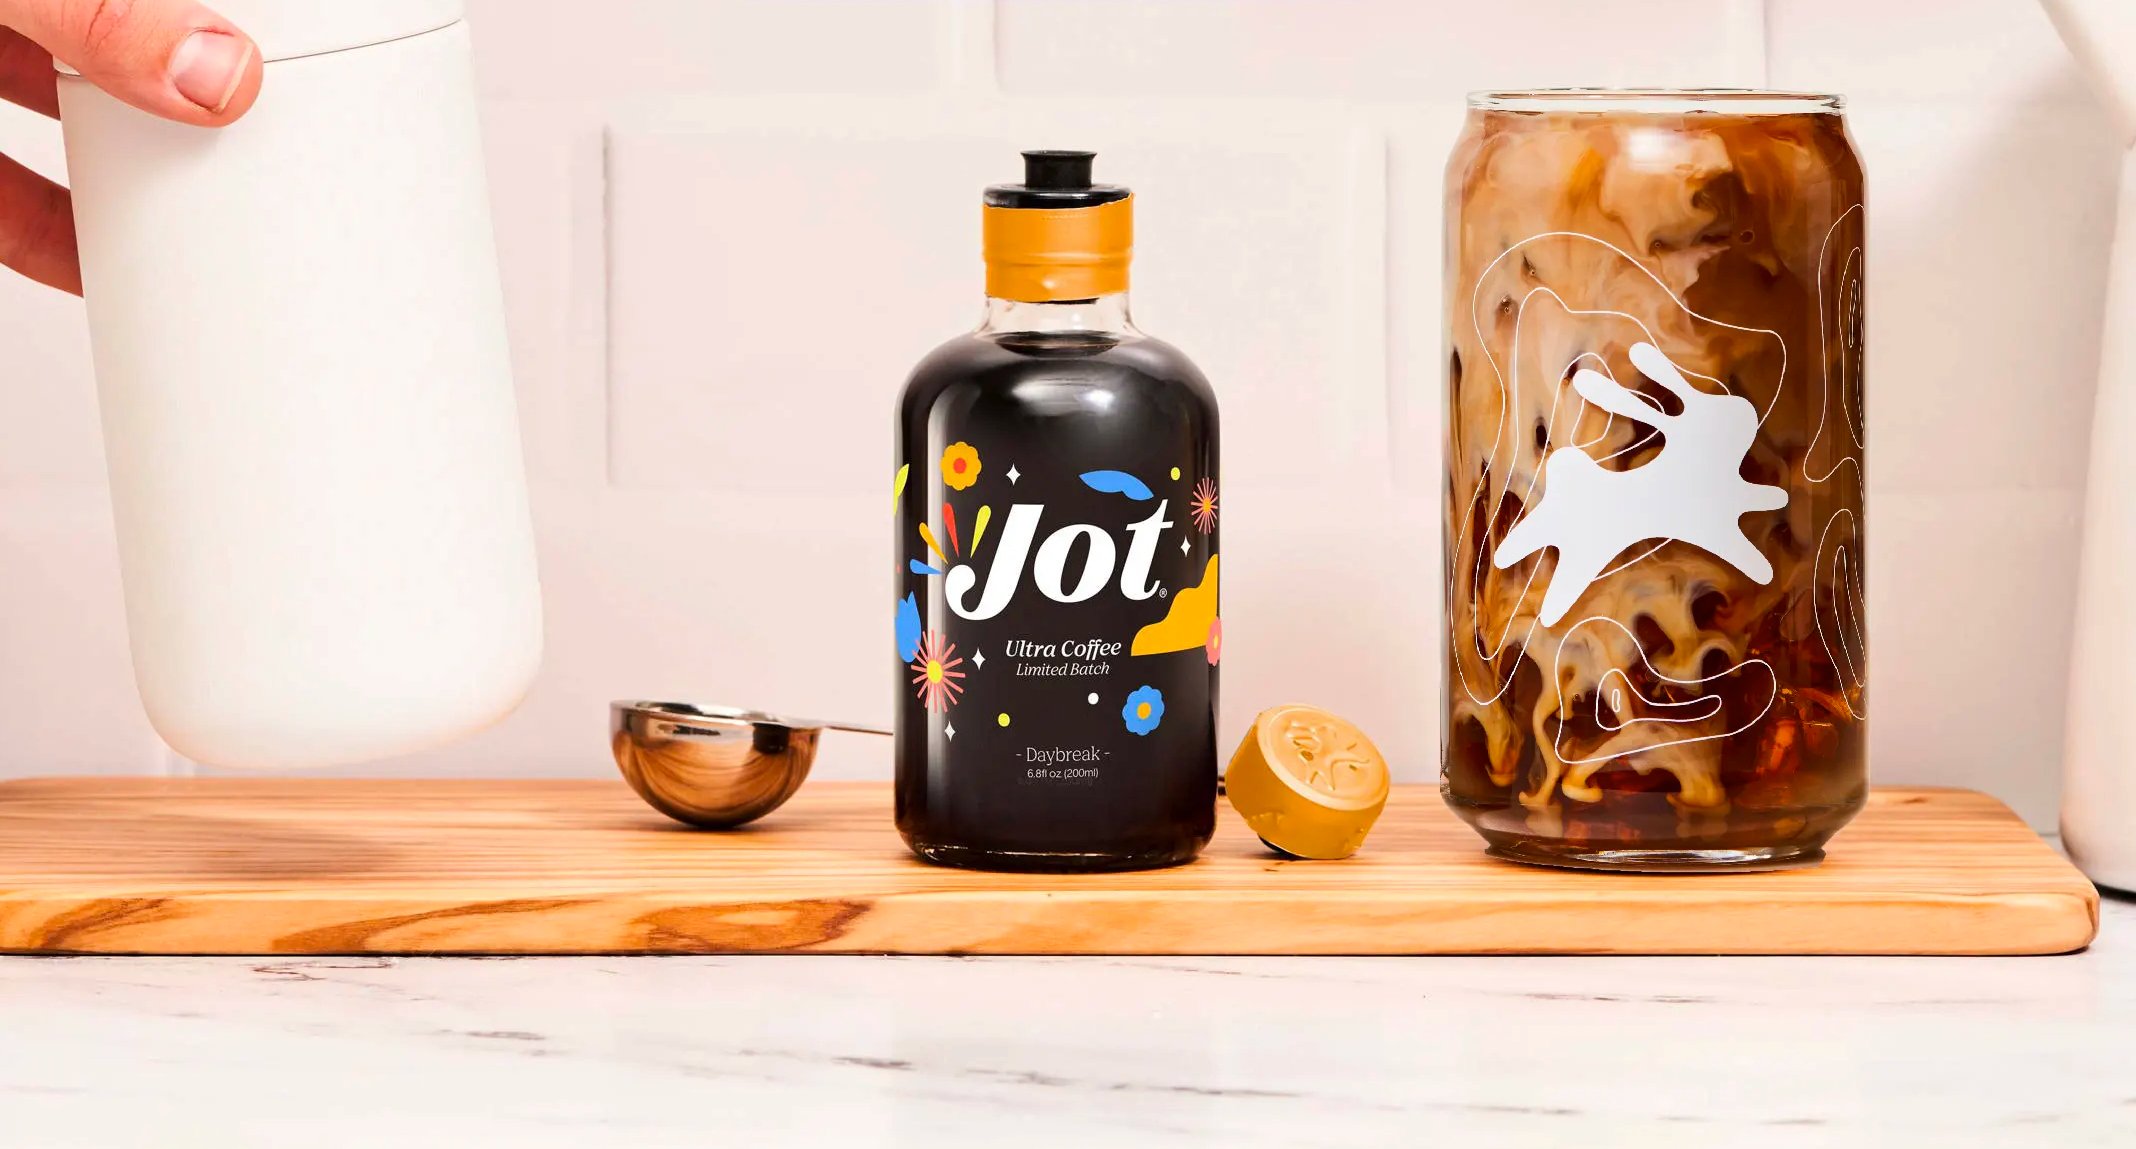 Caffeine Lover's Review of Jot Ultra Coffee Extract